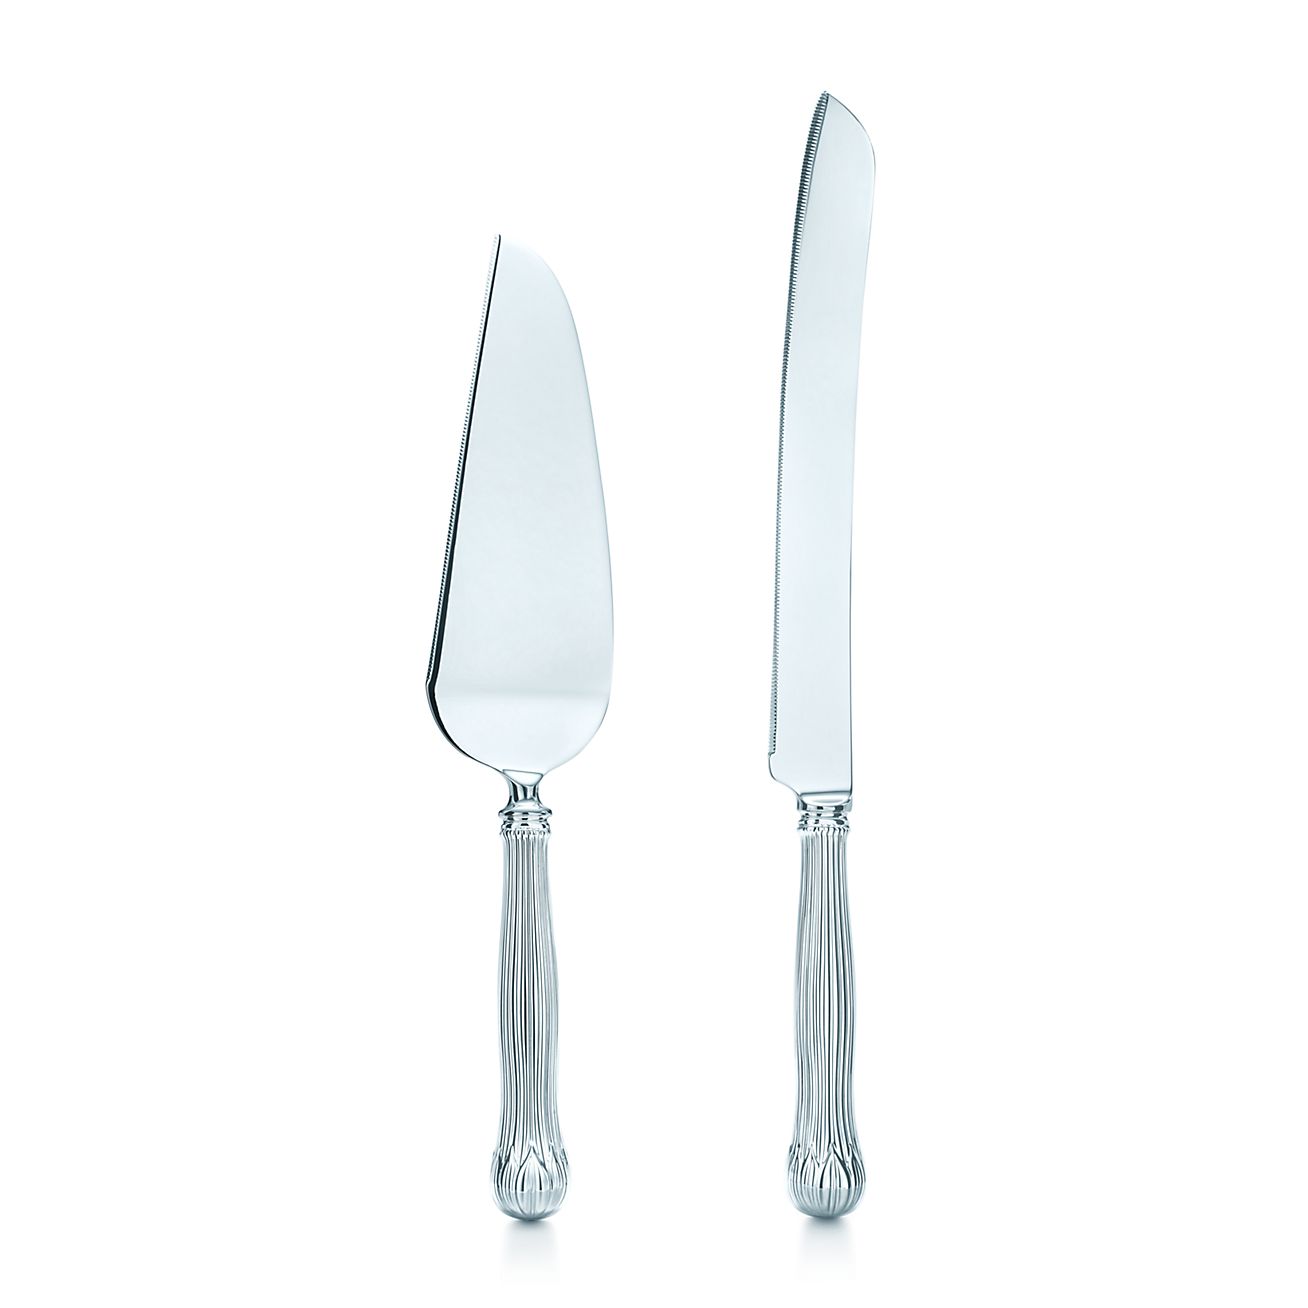 Lotus cake knife and server in sterling 